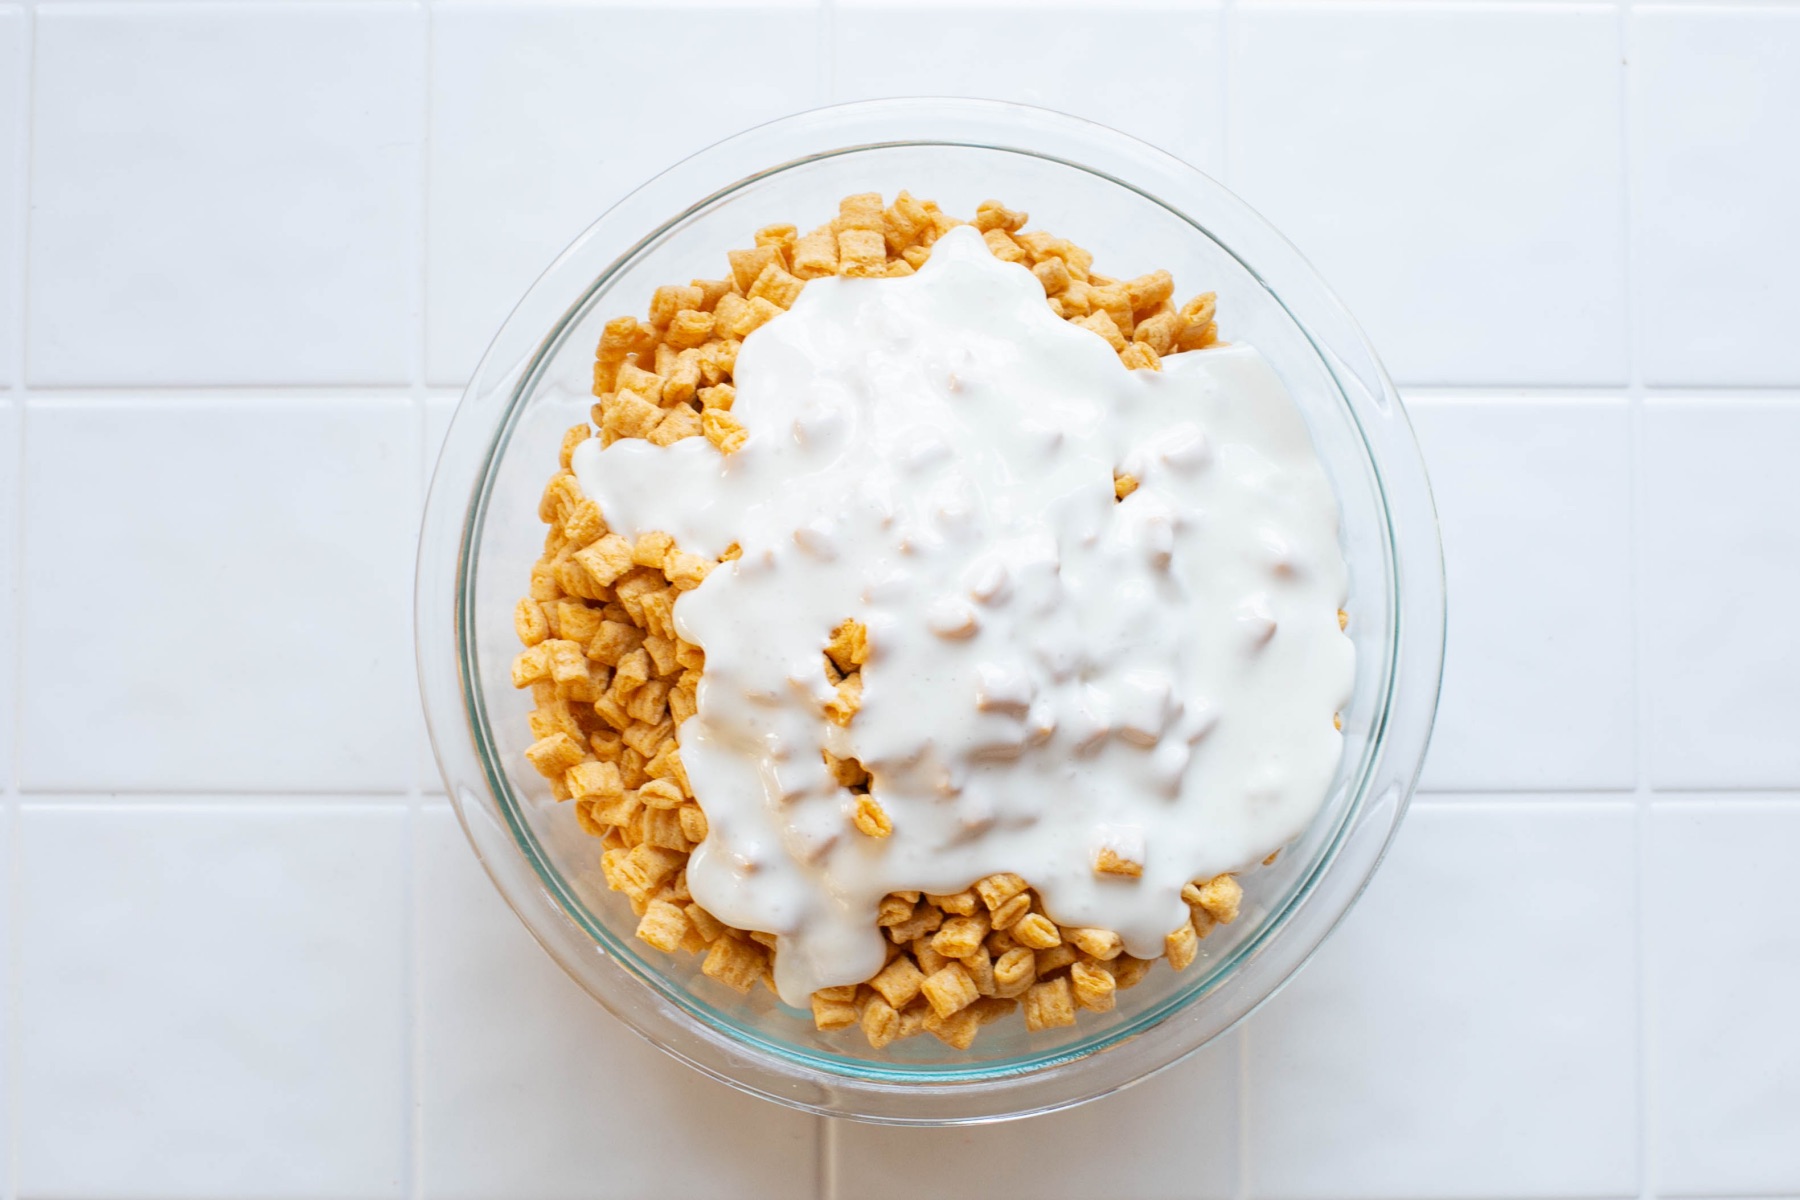 blend the marshmallow and cap'n crunch cereal